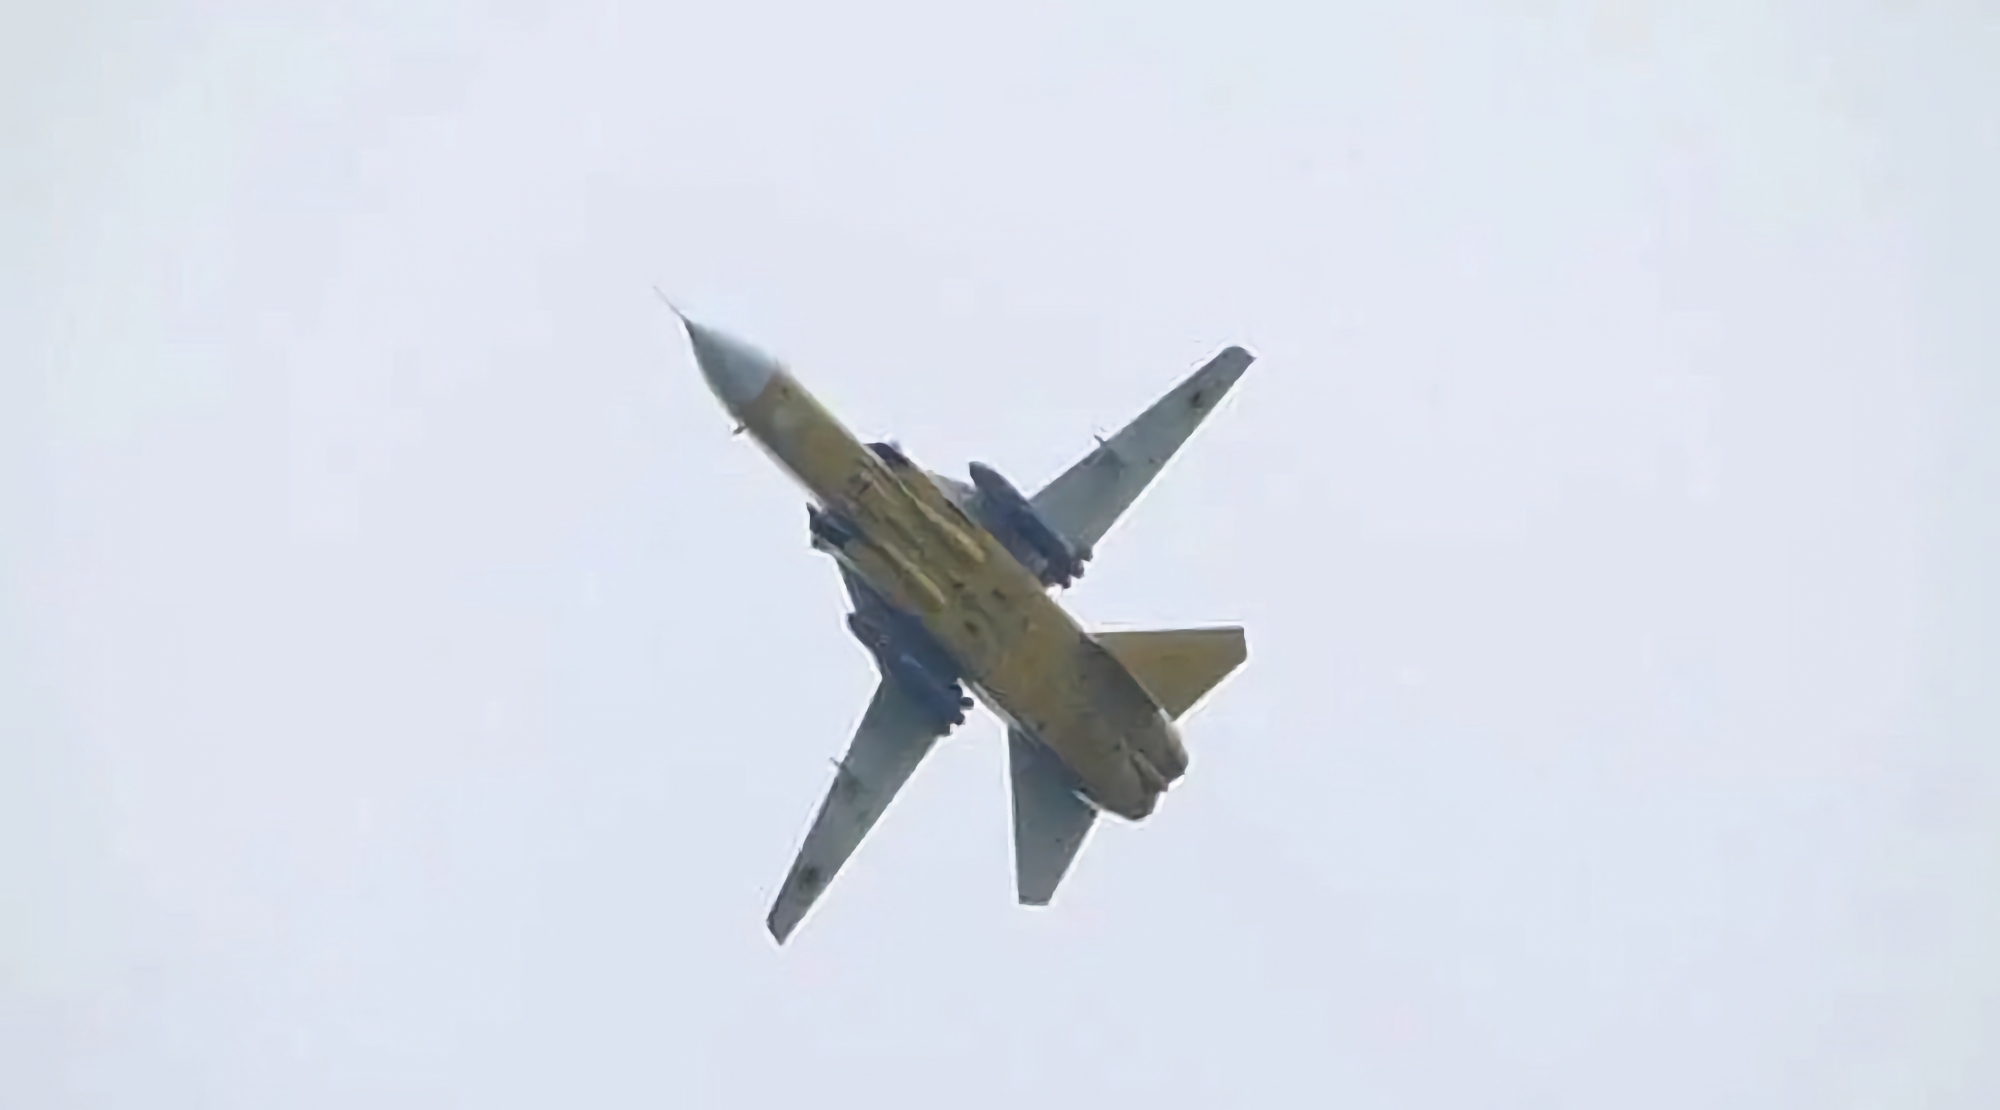 Ukrainian Su-24M attack aircraft with Storm Shadow missiles appear on video